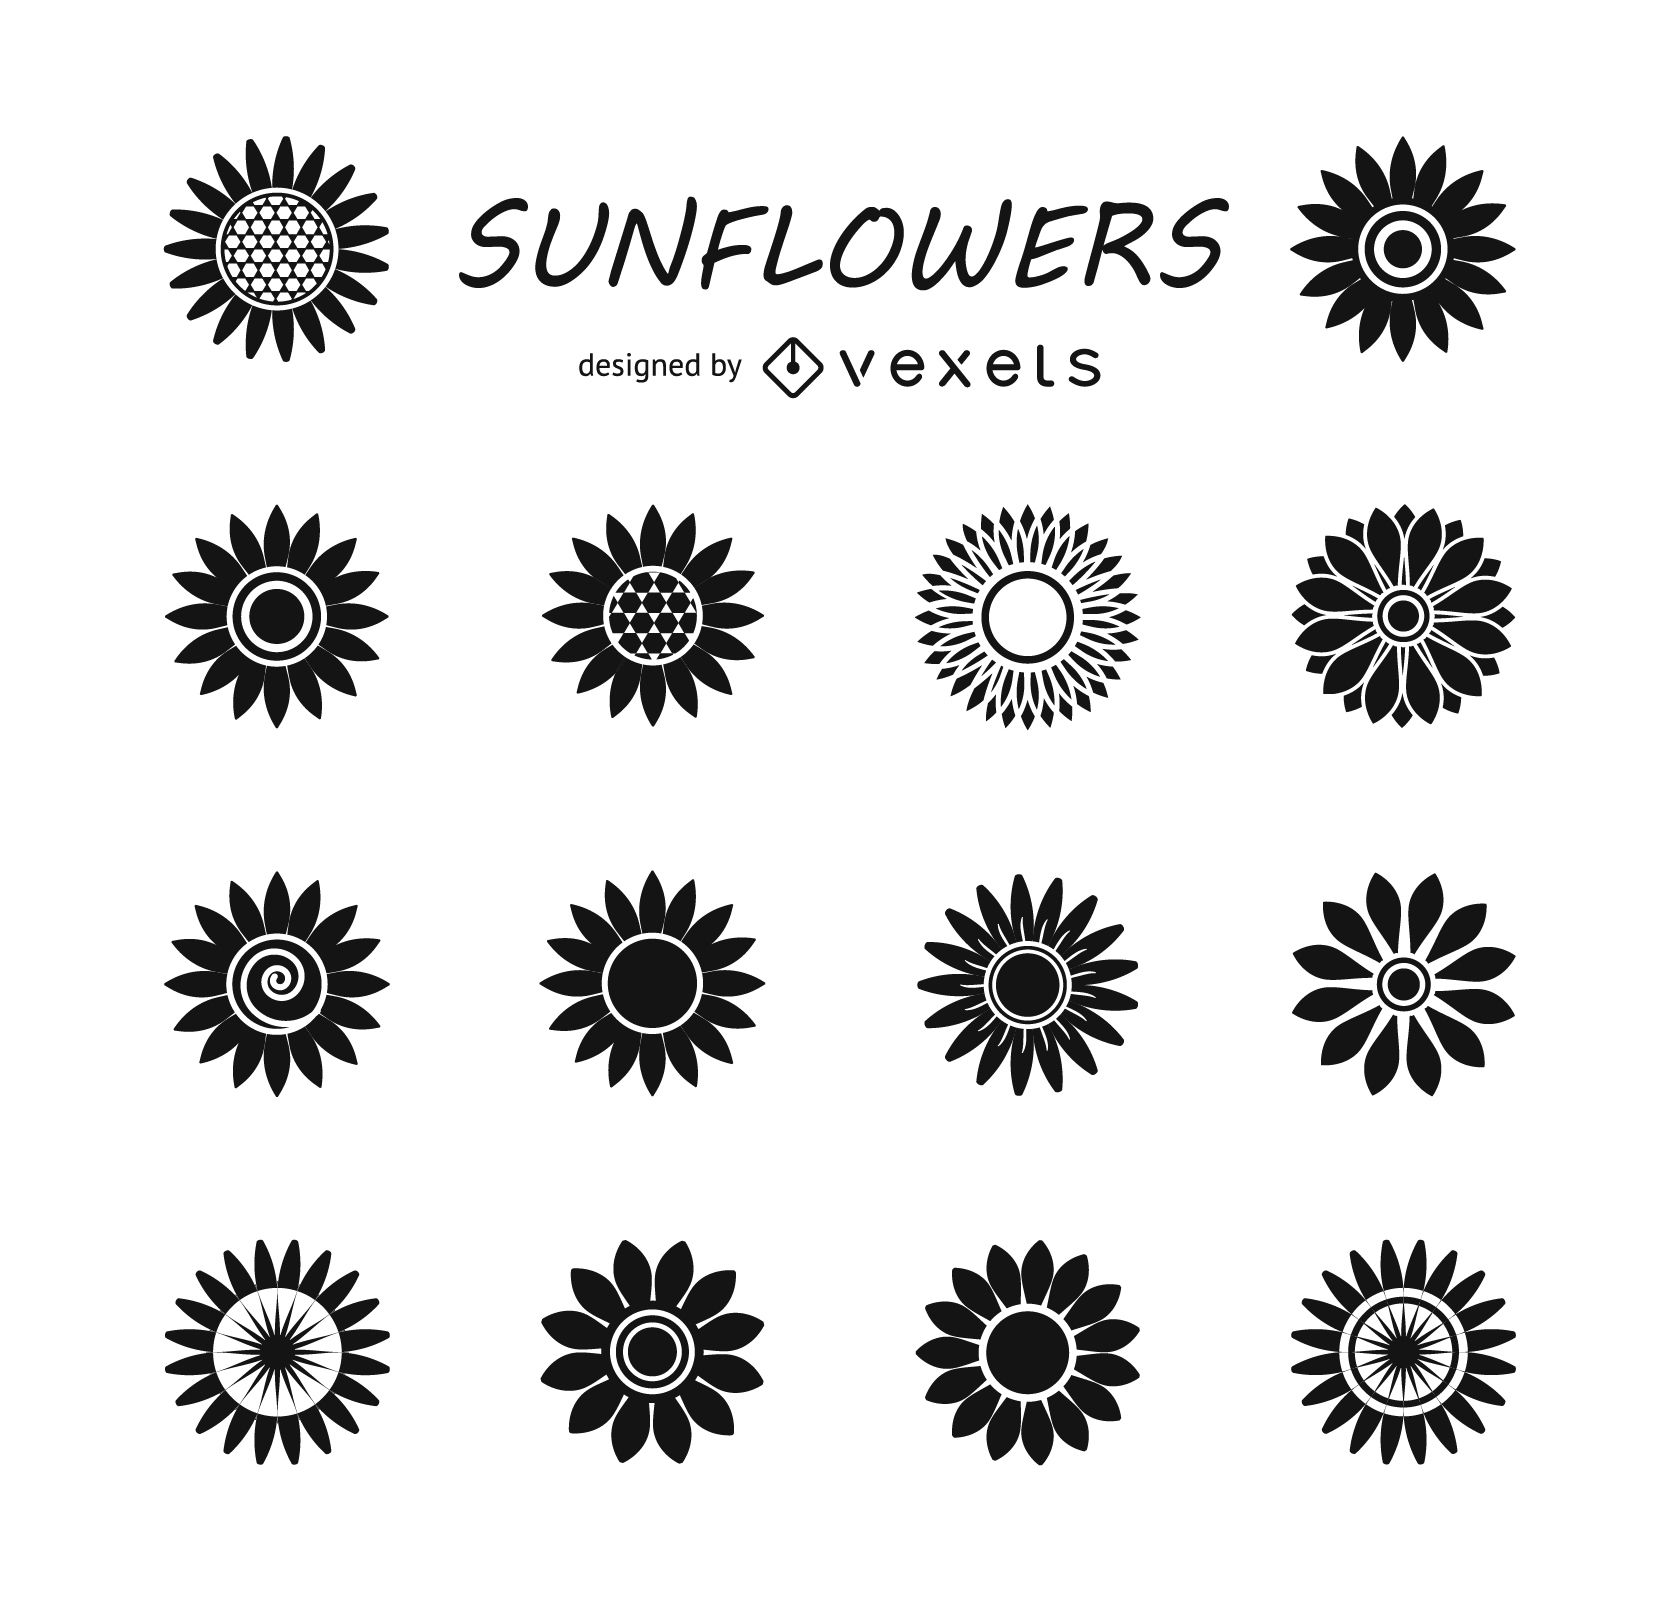 Set of sunflower silhouettes - Vector download